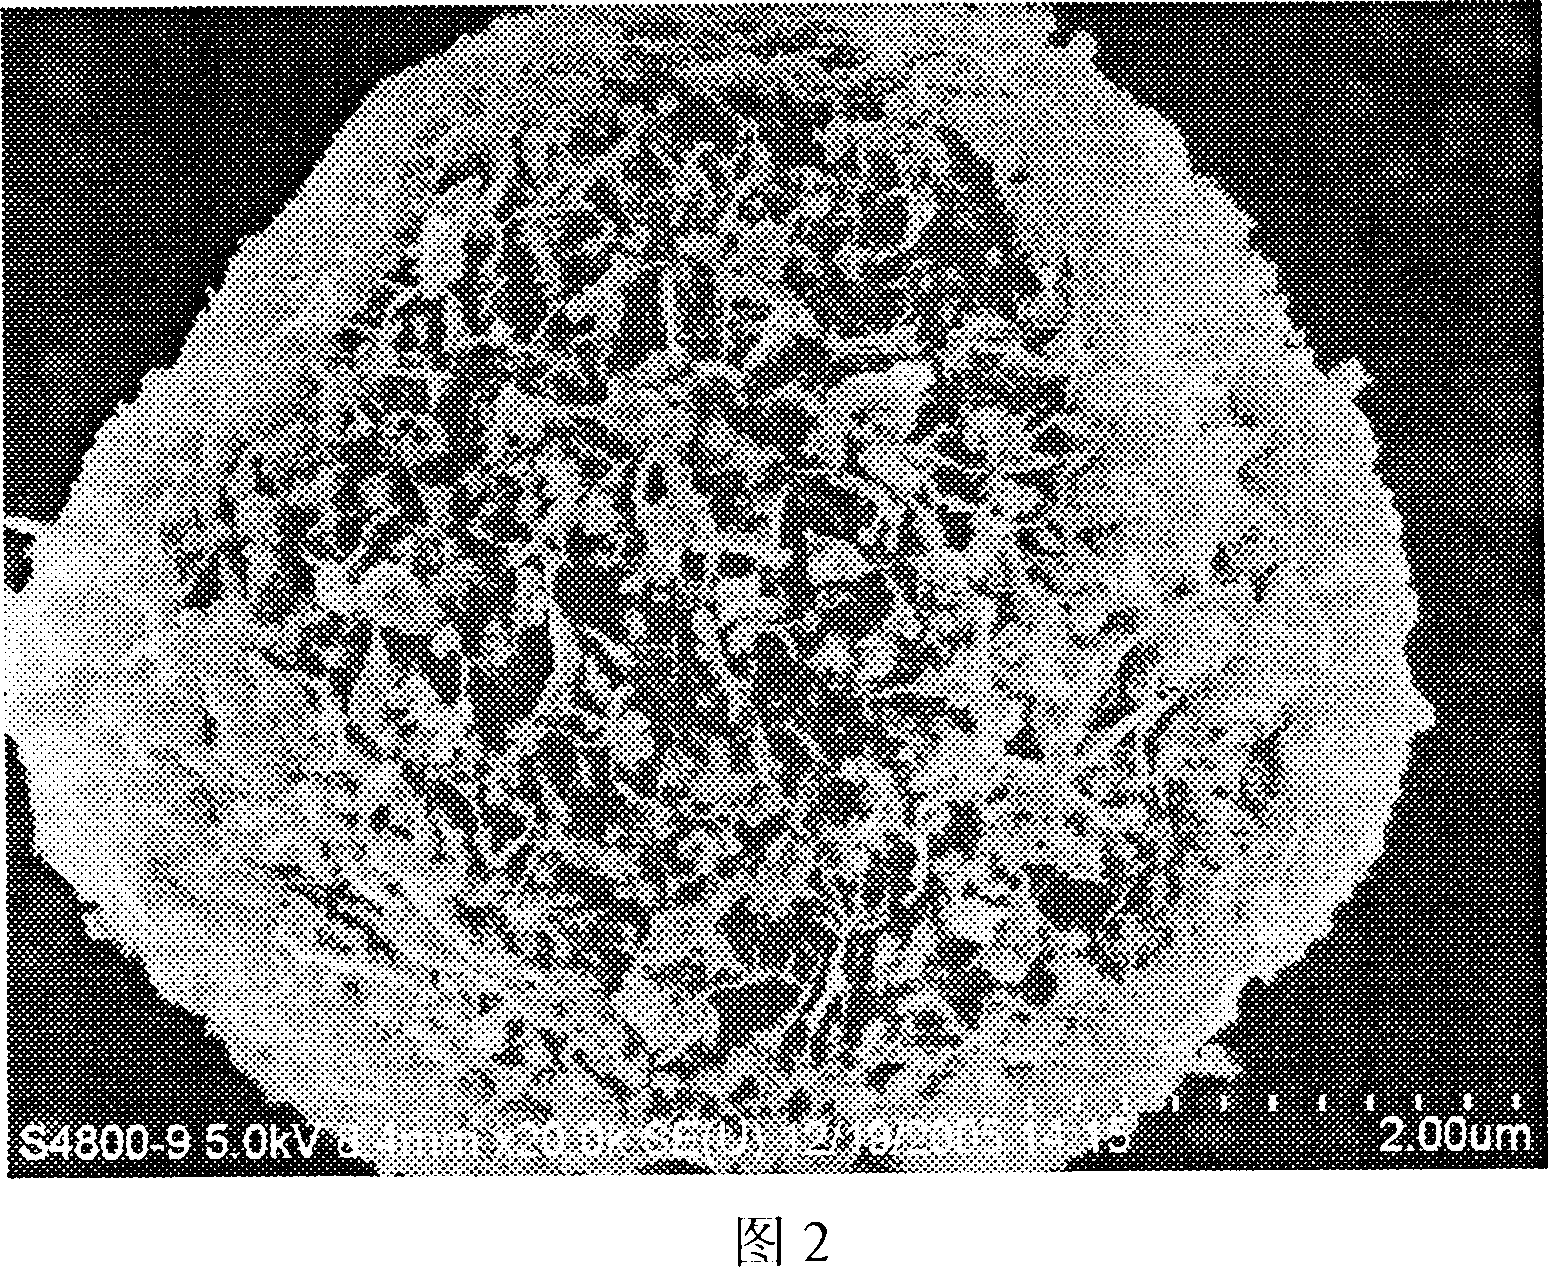 Process for preparing nano granule with high shape anisotropic property